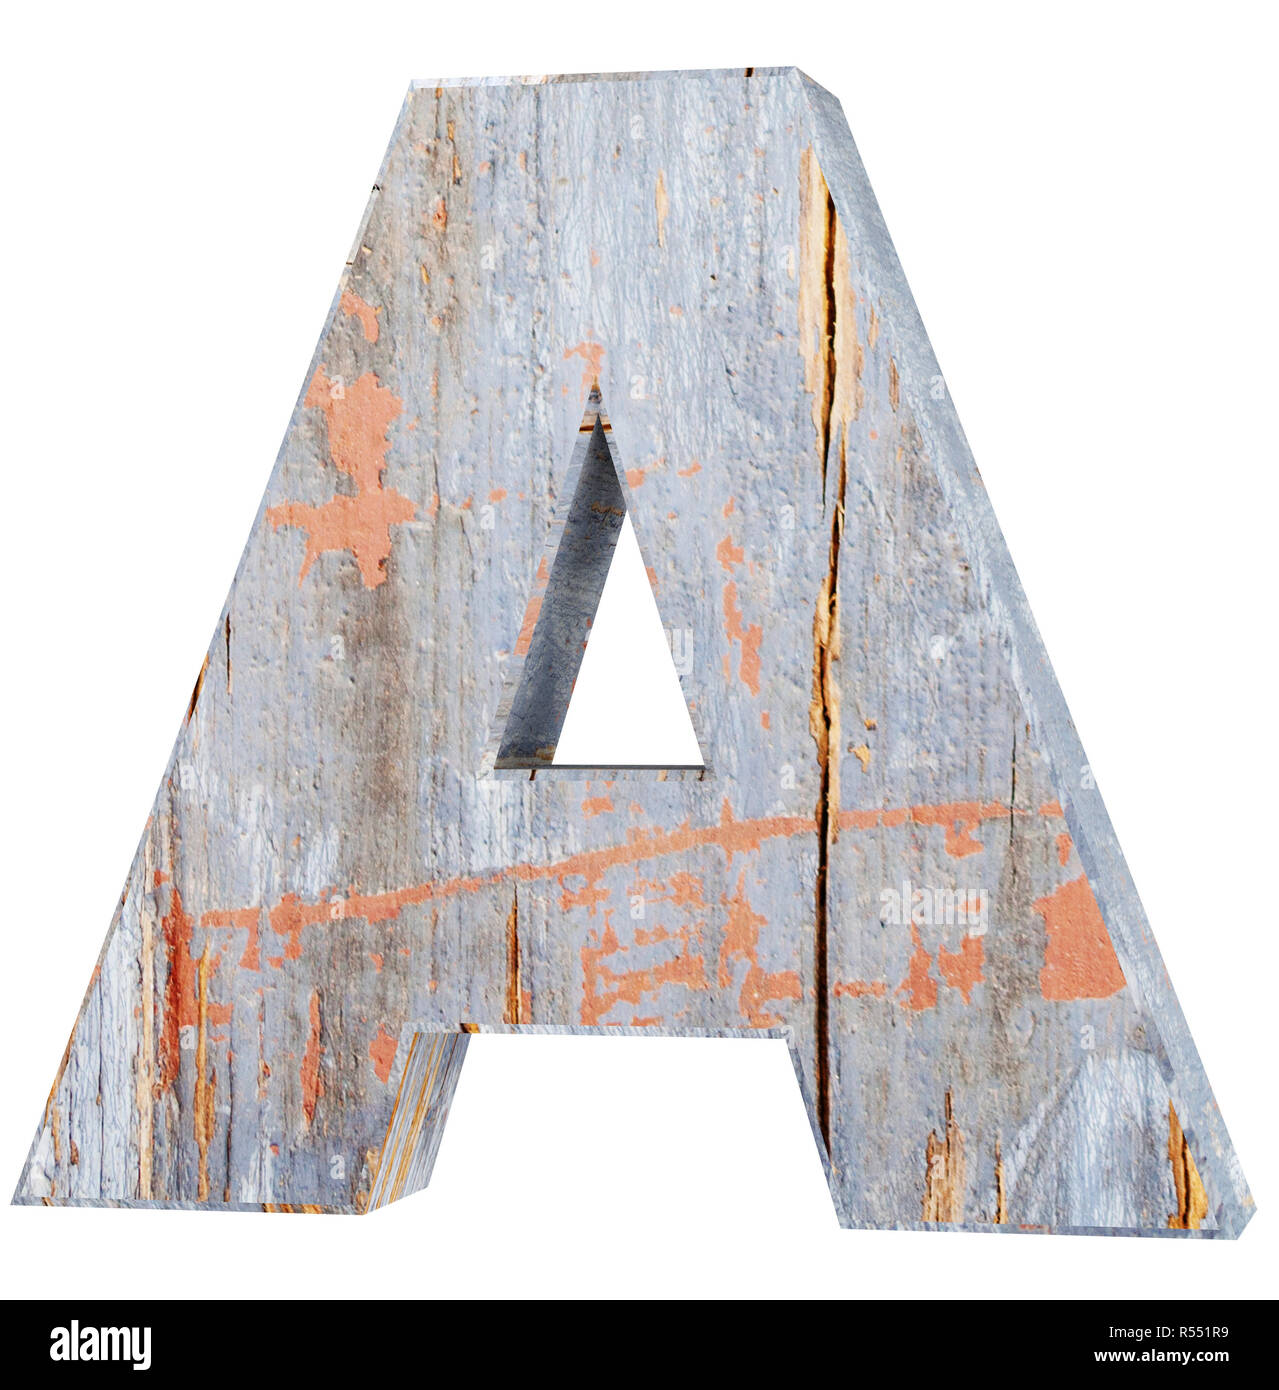 Decorative wooden alphabet letter - A. 3d rendering illustration. Isolated on white background Stock Photo